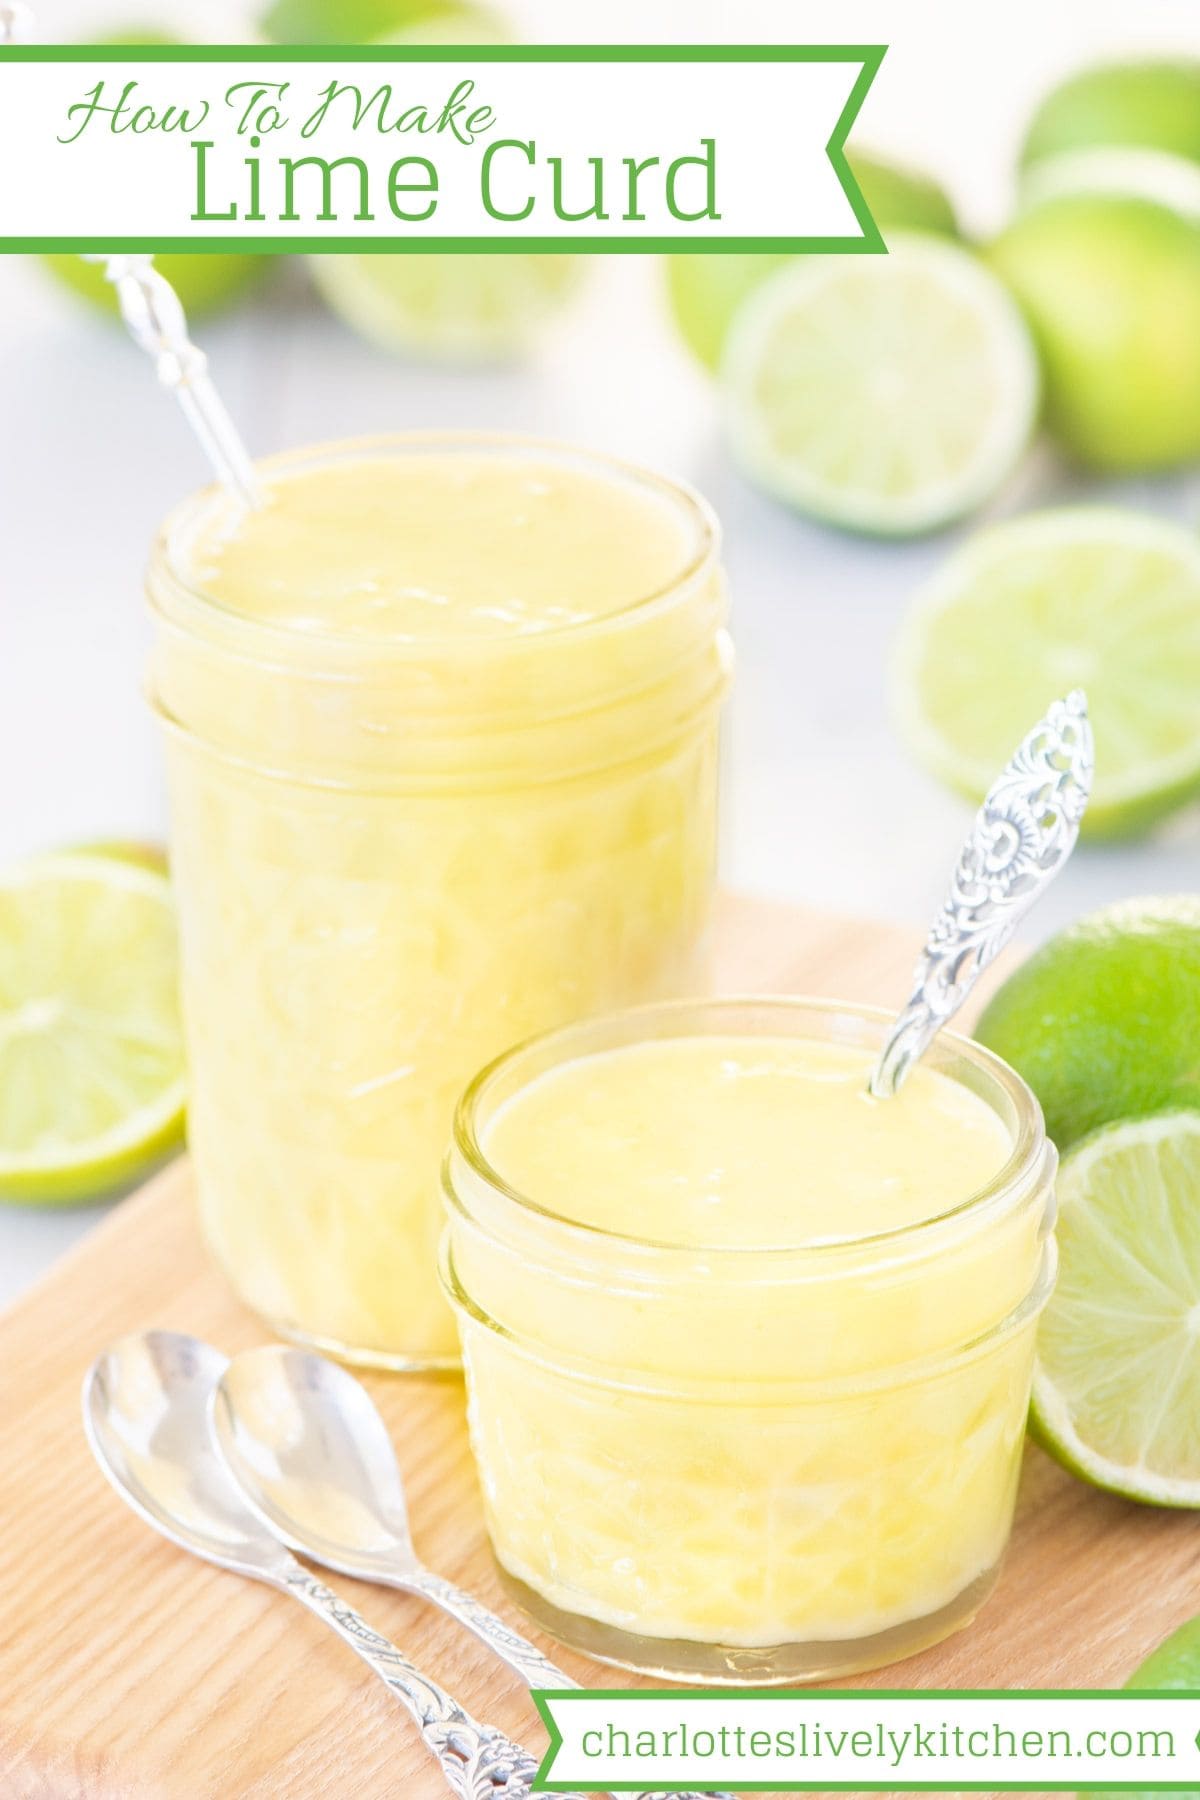 Two jars of lime curd. There's a title written on the image saying "How To Make Lime Curd", making this image perfect for saving to Pinterest.